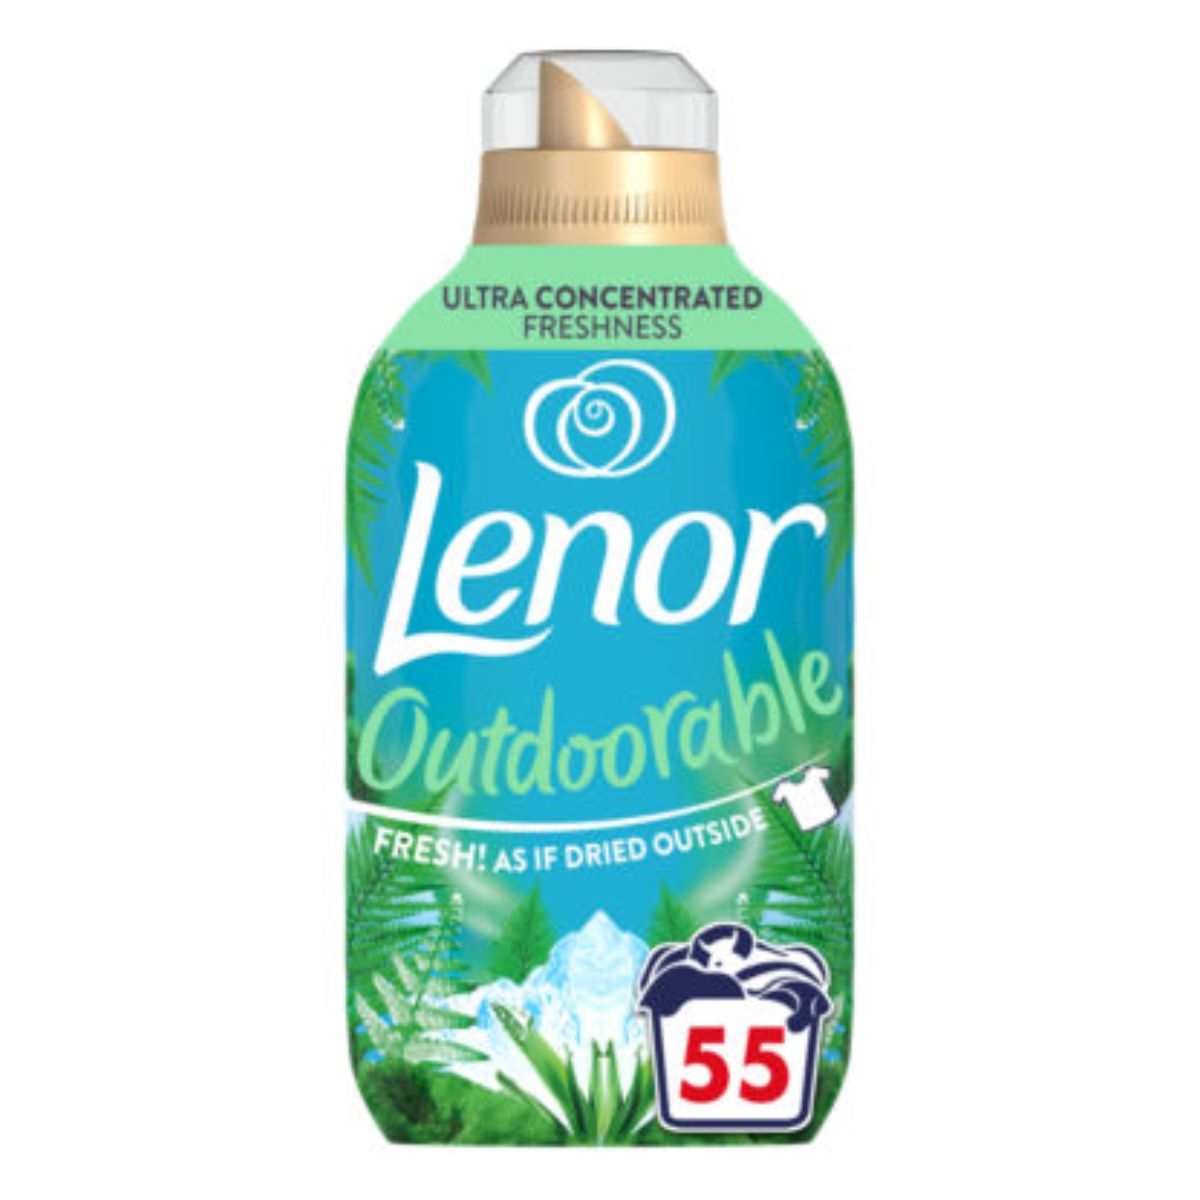 Lenor - Outdoorable Fabric Conditioner 55 Washes - 770ml - 500 ml.